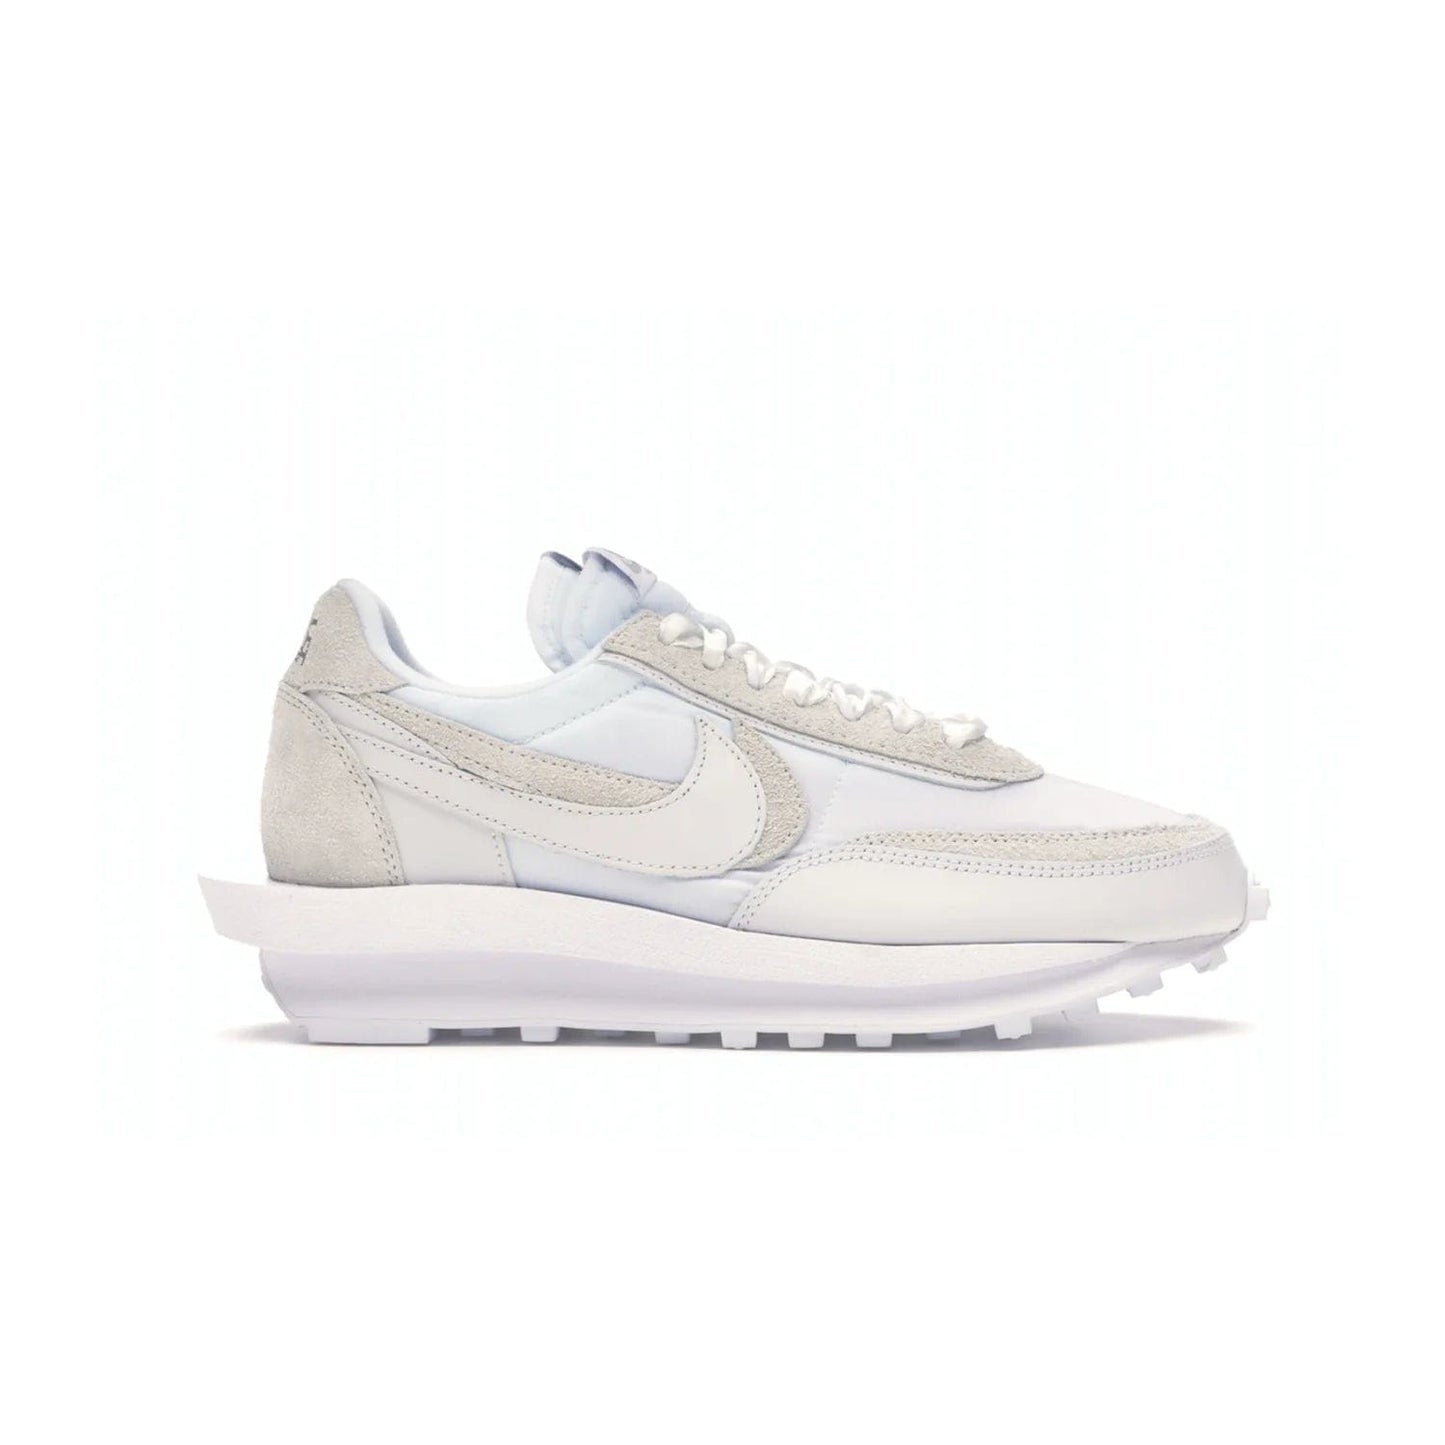 Nike LD Waffle sacai White Nylon - Image 1 - Only at www.BallersClubKickz.com - A classic, timeless design with a white nylon upper and subtle grey suede overlays. This recent Nike LD Waffle Sacai White Nylon design requires only one pair of laces to complete the perfect look for smart and casual styles.